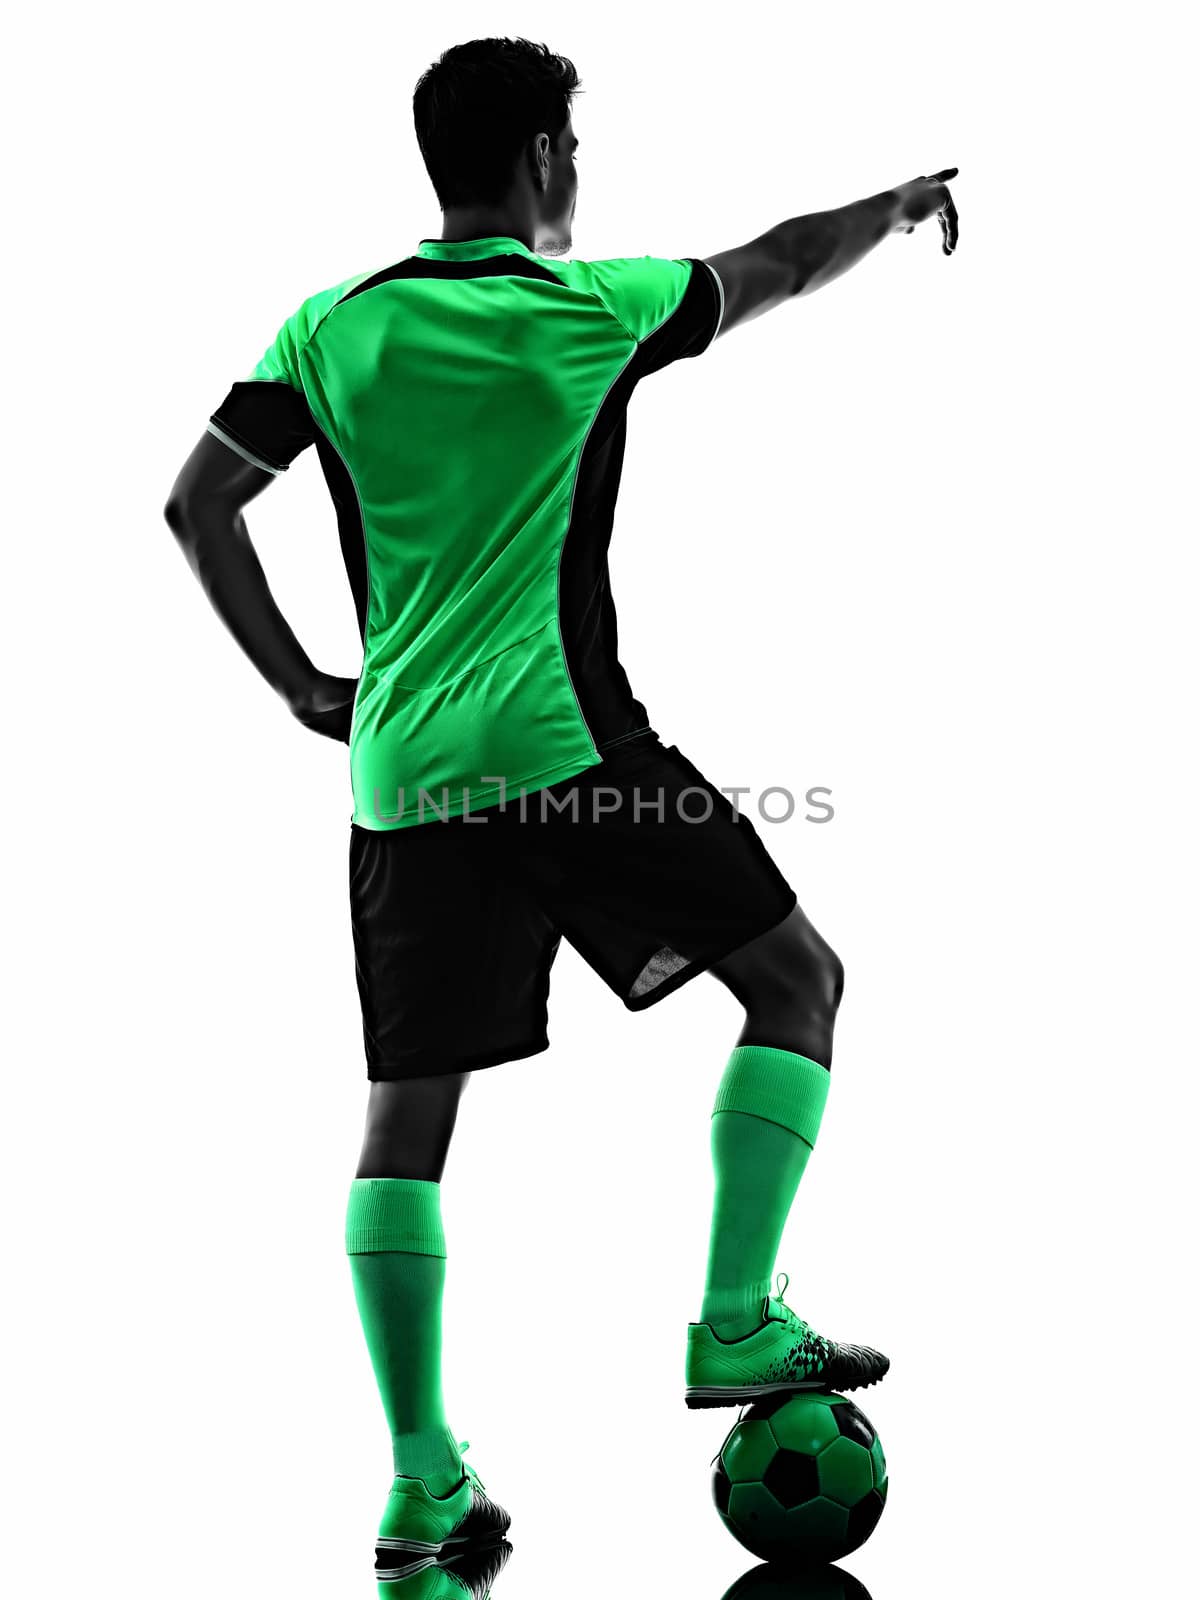 one young caucasian soccer player silhouette shadow in studio isolated on white background